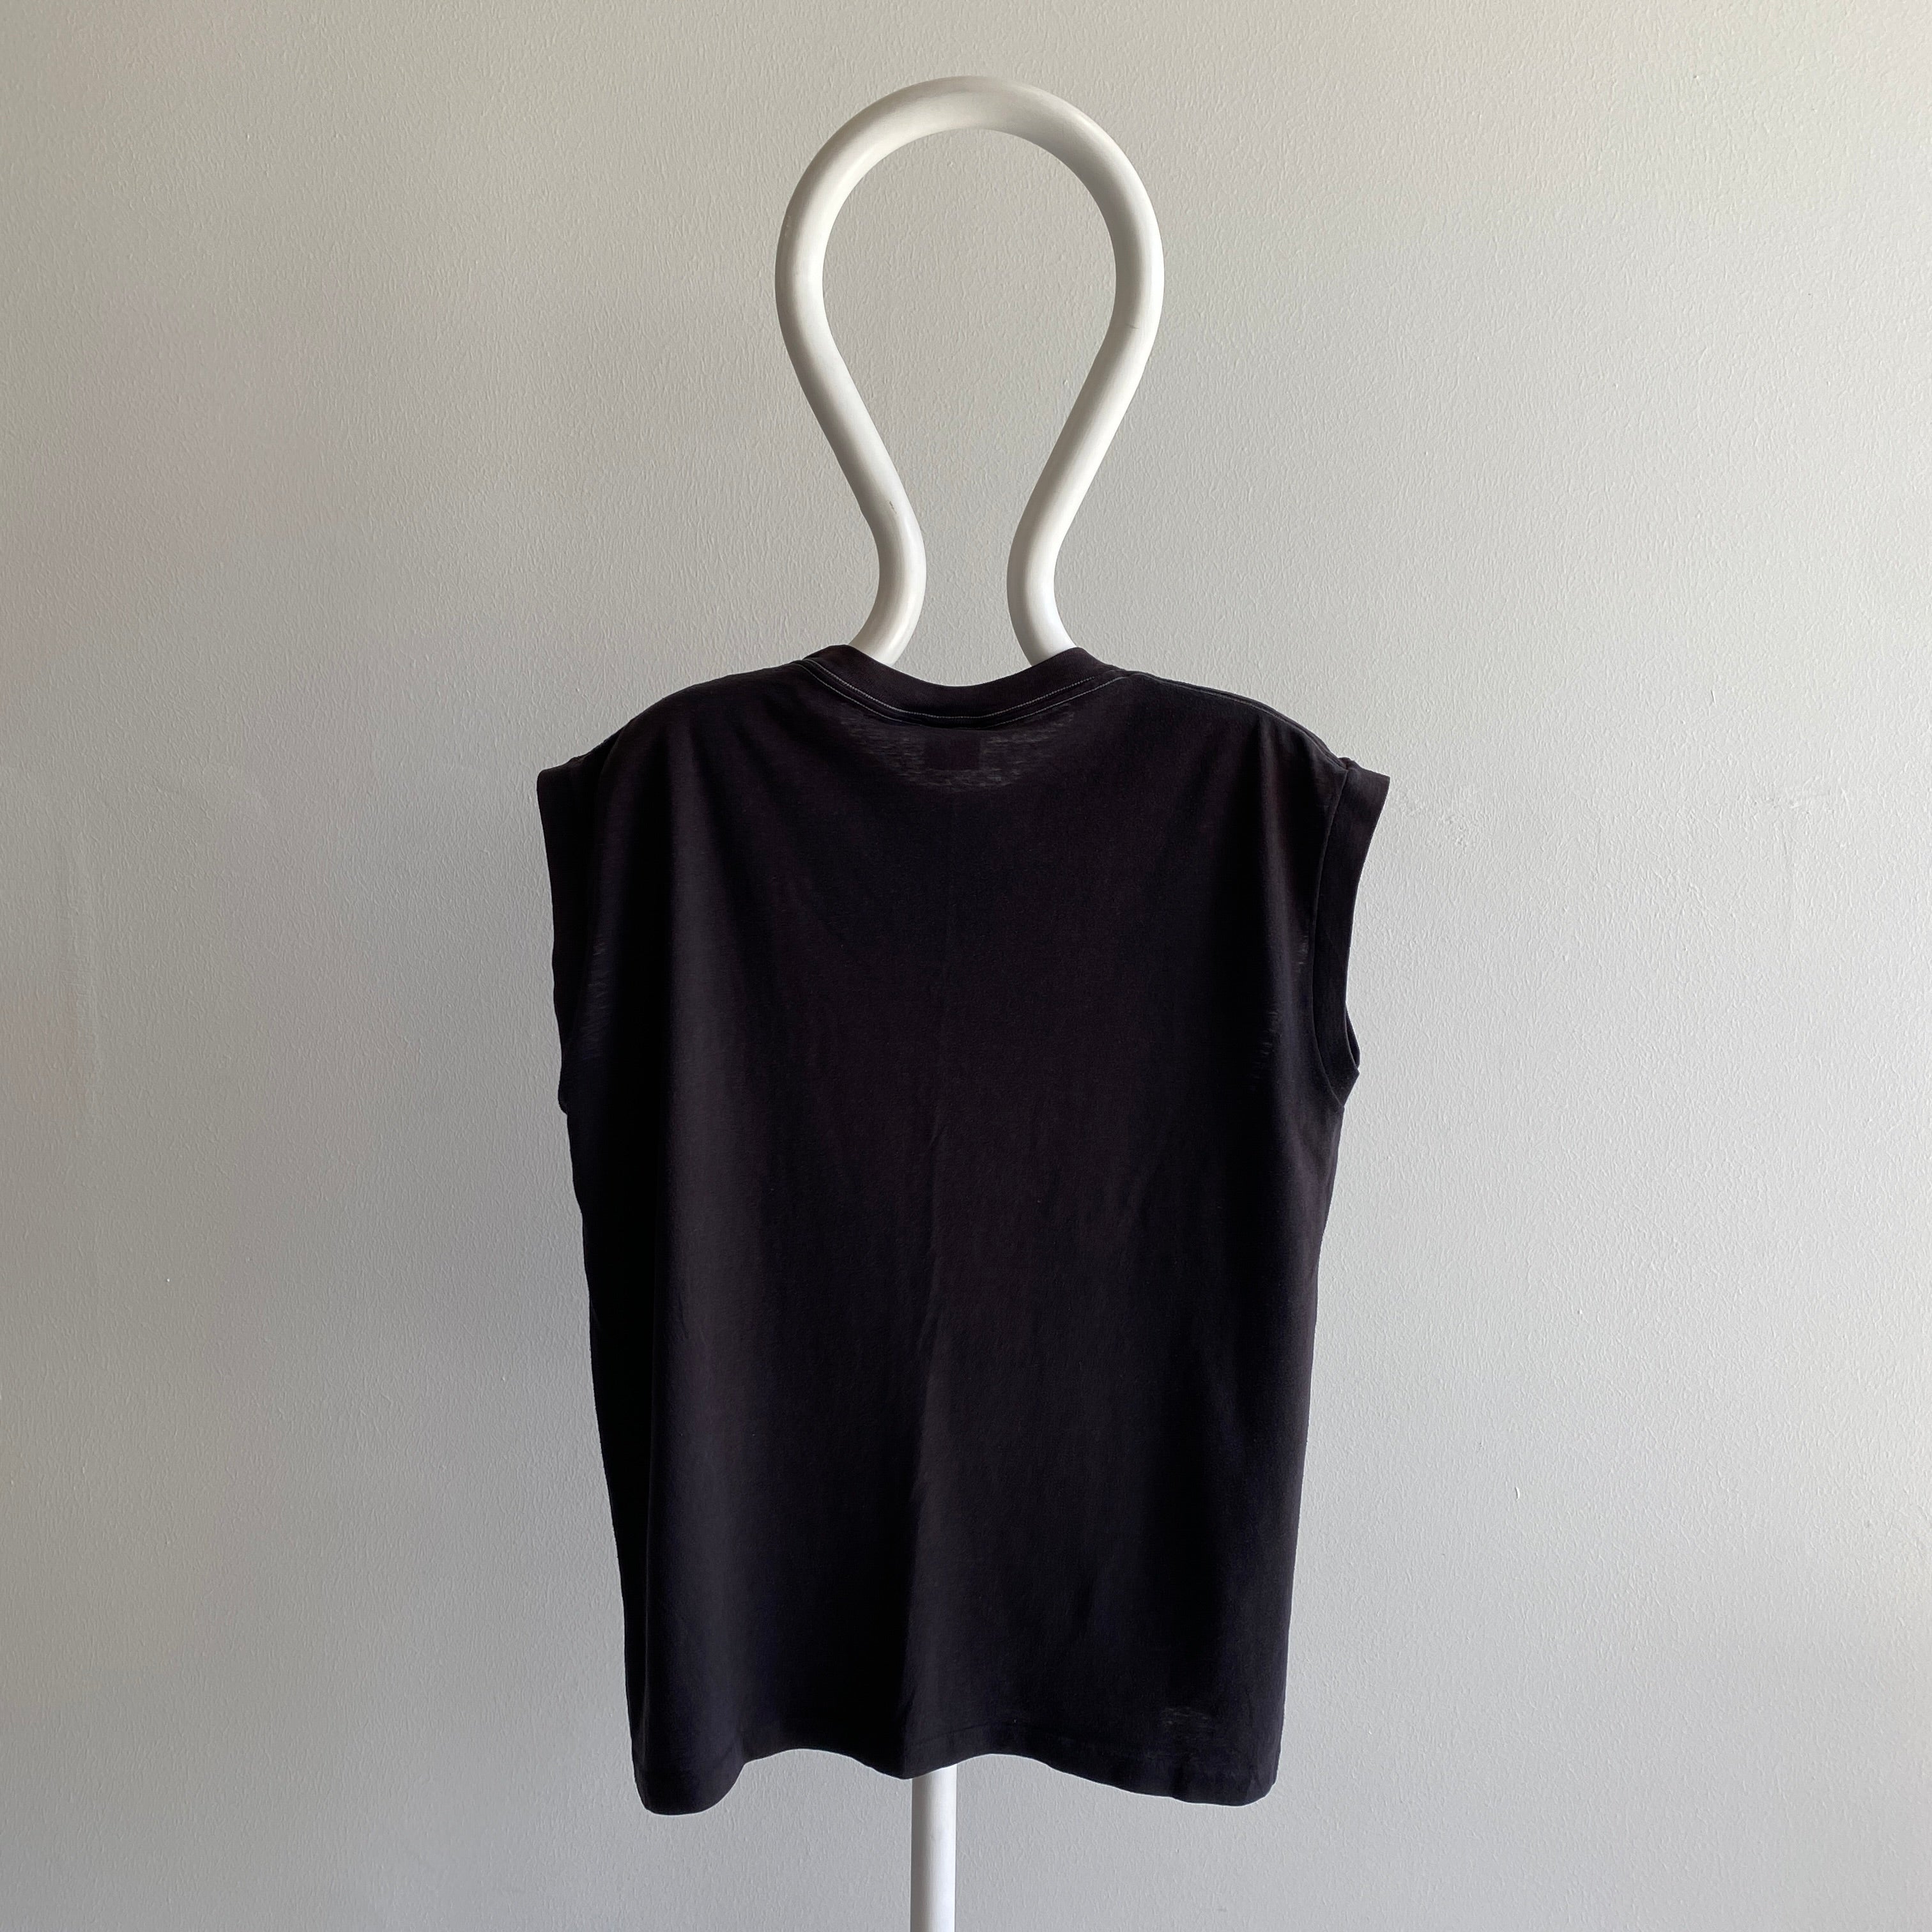 1970s Blank Black Muscle Tee - The Best One!!